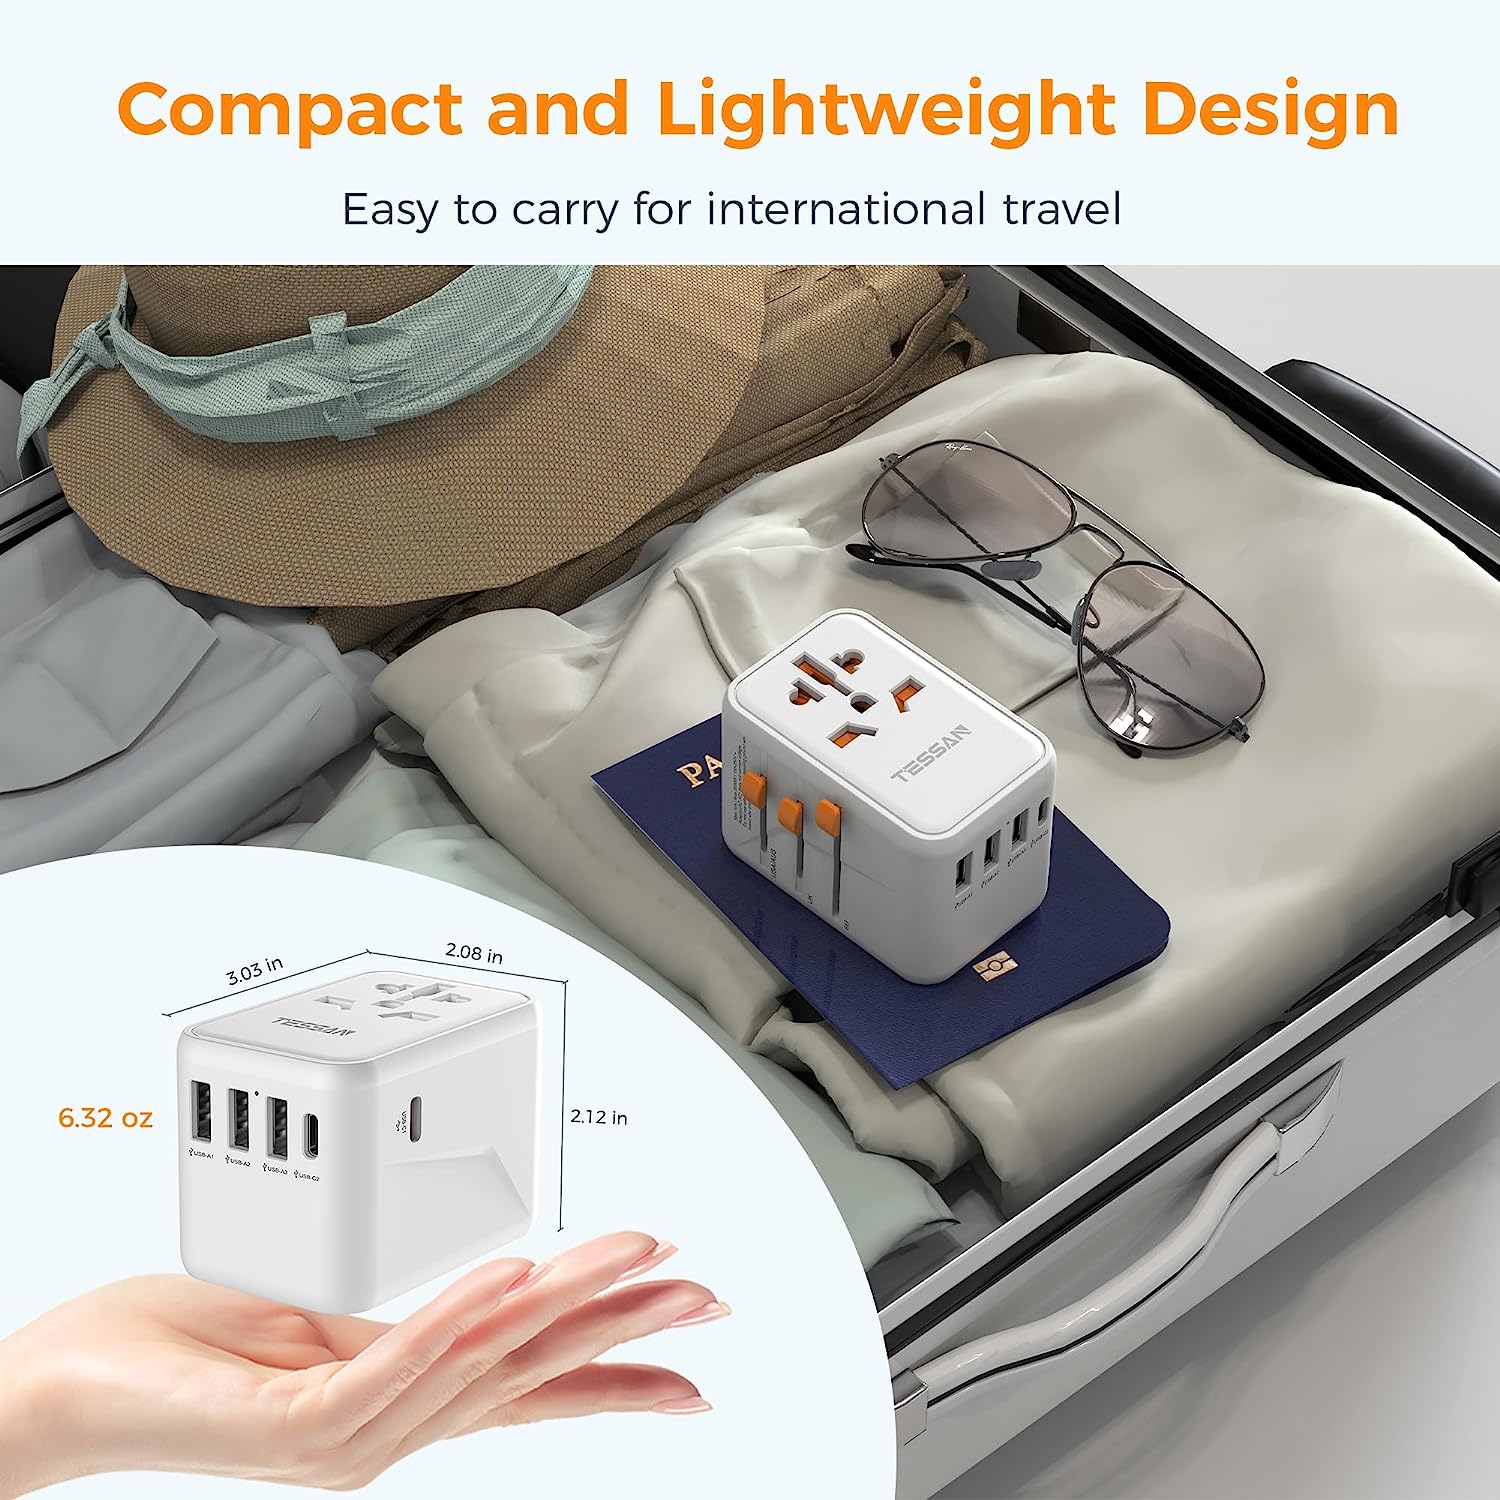 Universal Travel Adapter with 2 USB C and 3 USB Ports (Fast Charging PD 45W)